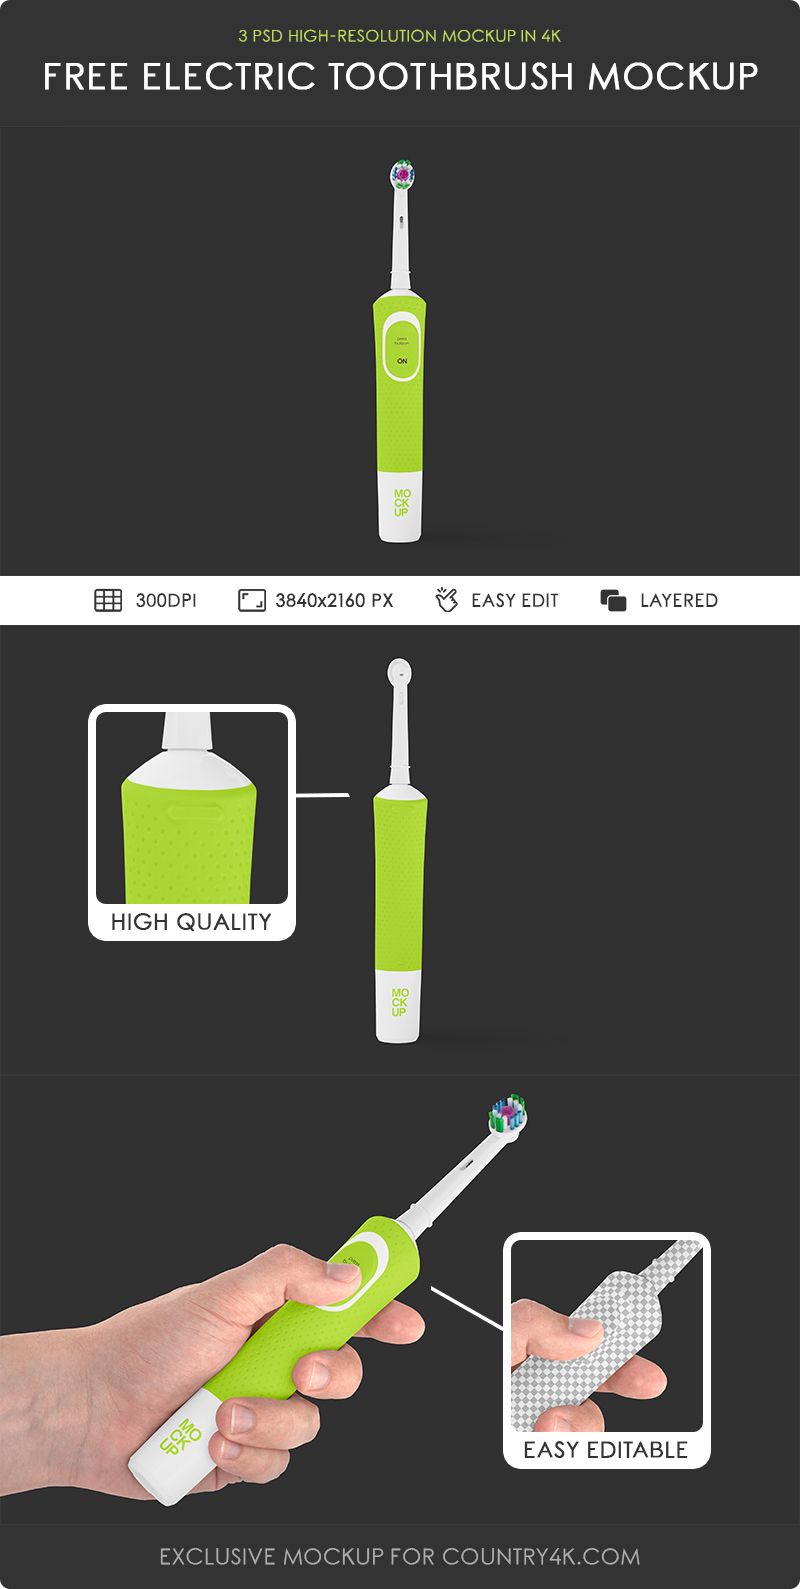 Preview mockup 3 electric toothbrush 3 free mockups psd